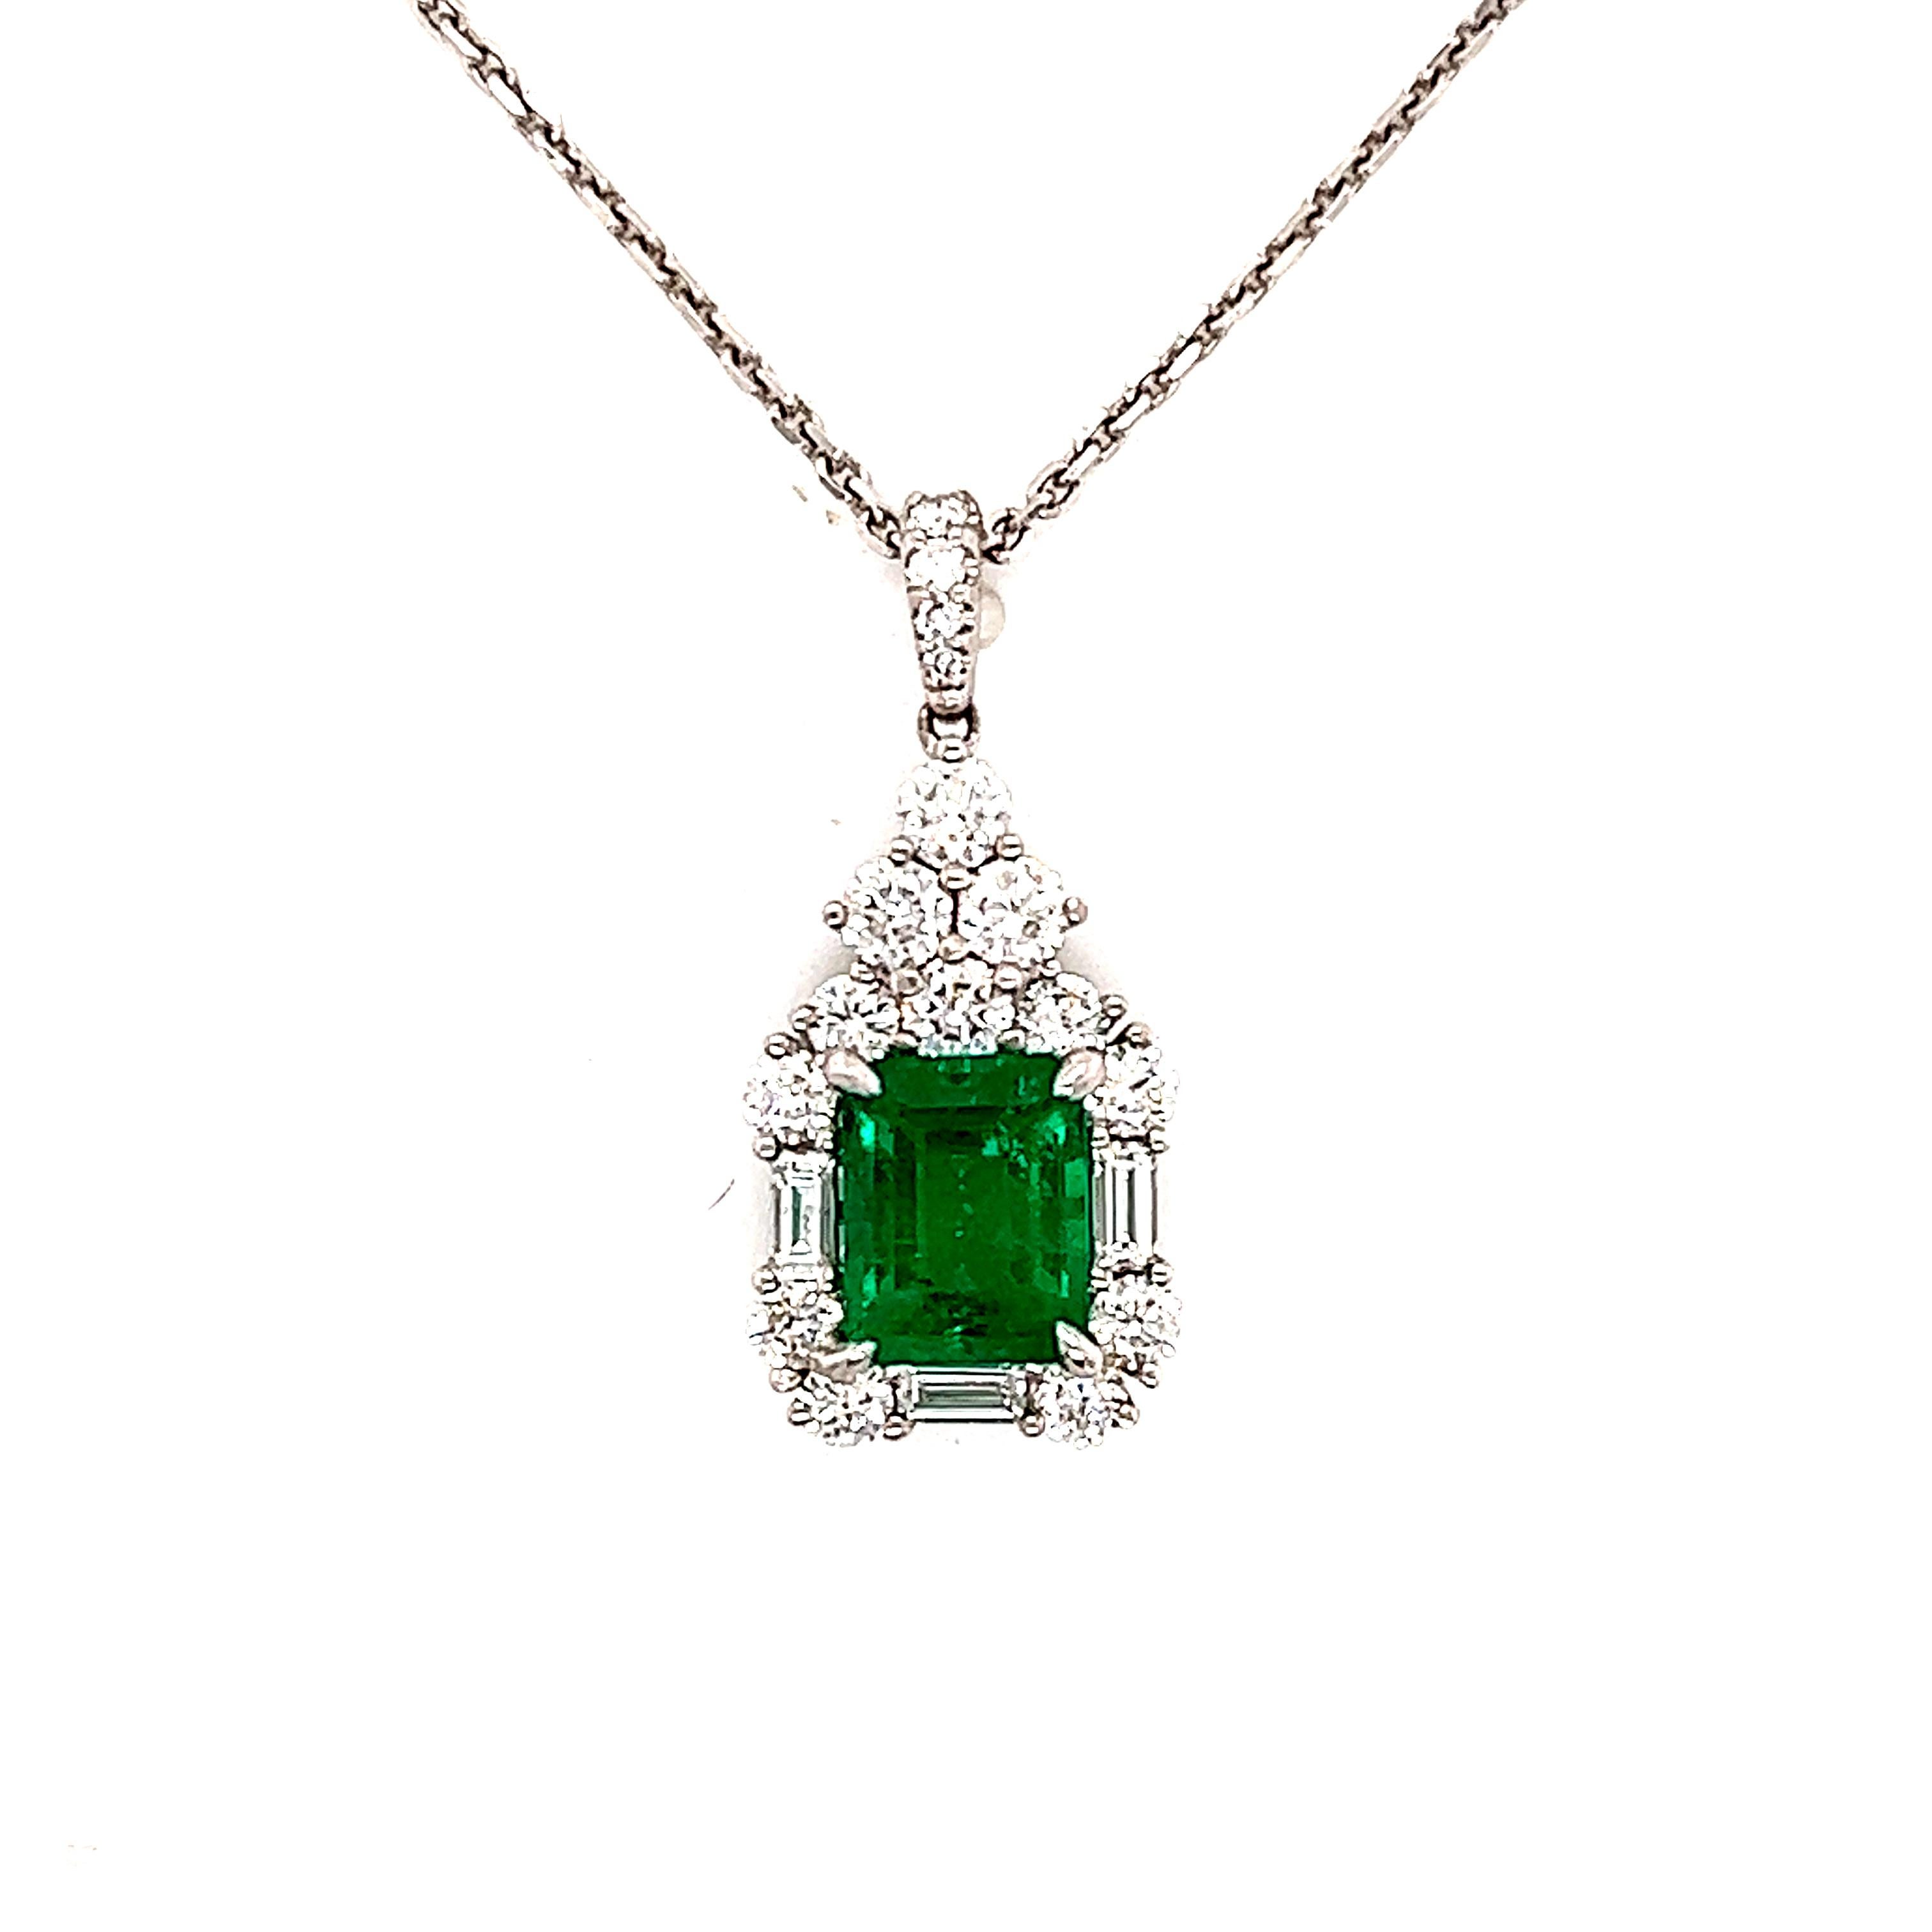 Gorgeous necklace crafted in 18k white gold. The highlight of the piece is the Colombian emerald that has a vivid pop of green color. The emerald gemstone is accompanied by a GIA report #2205936581. The center gemstone measures 8.35 x 6.58 x 4.41